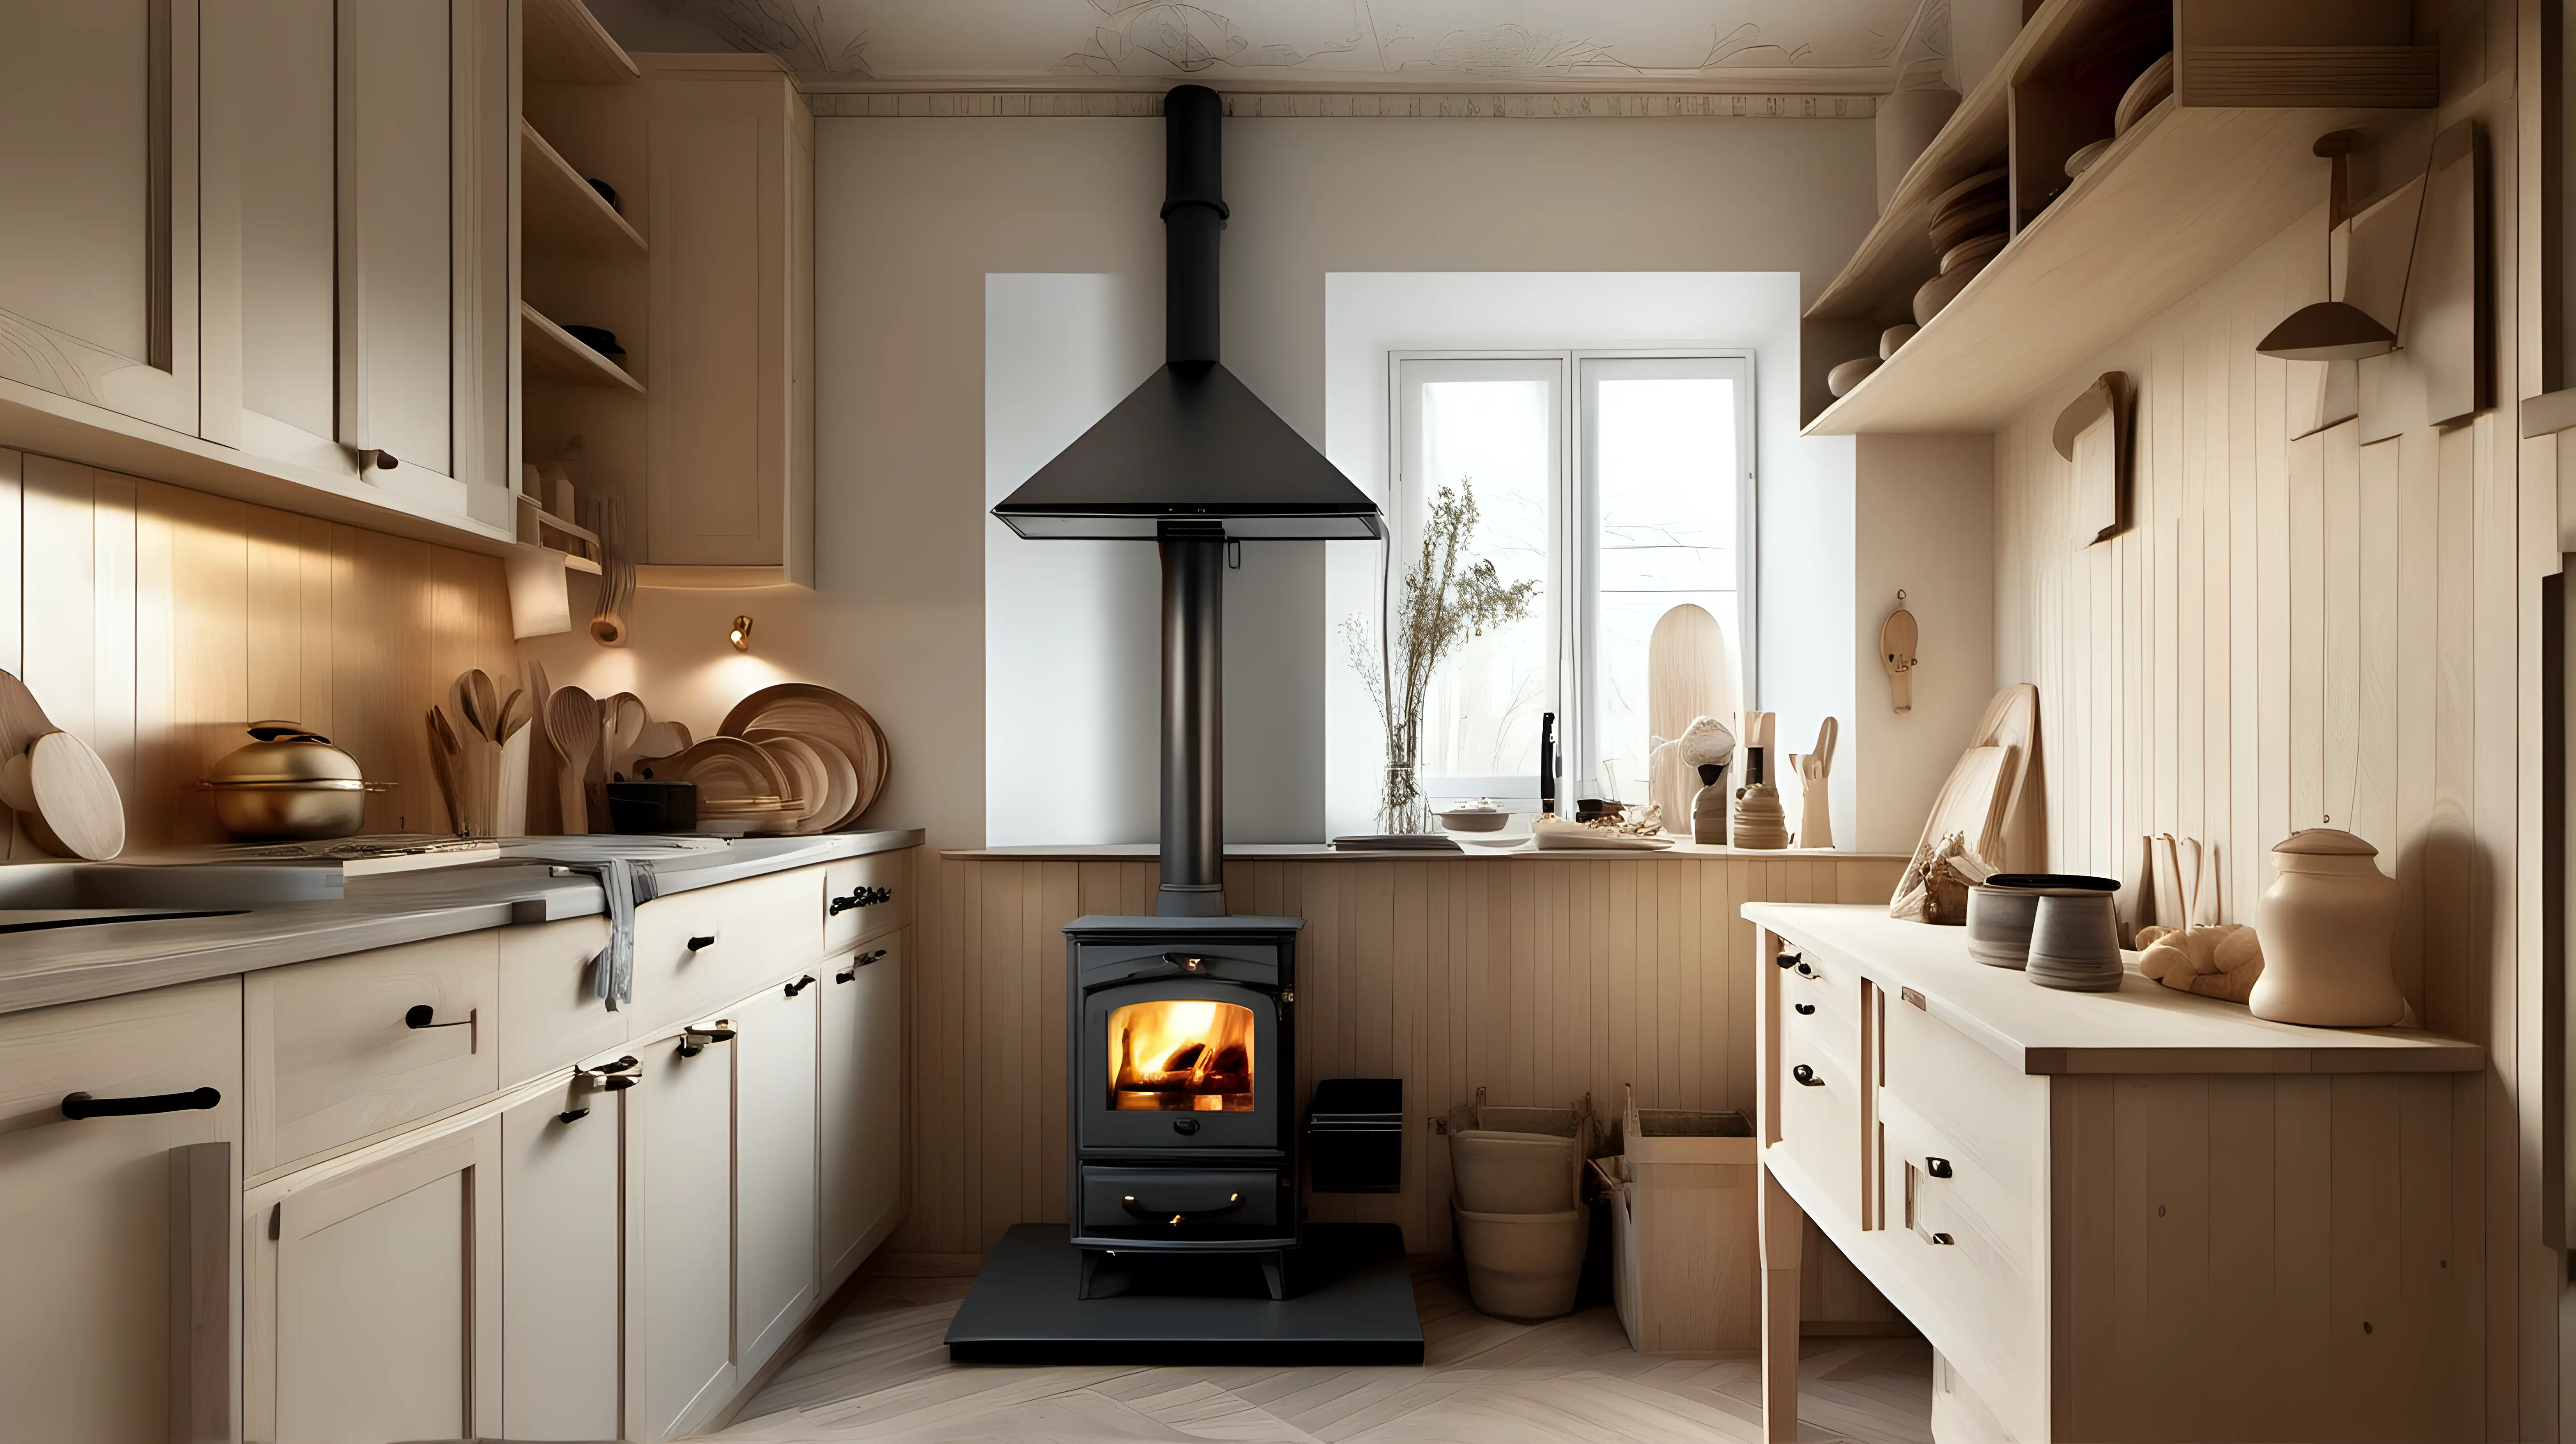 A nordic kitchen, maple wood accents and moldings and a black wood-burning stove Warm golden lighting, photographic quality.